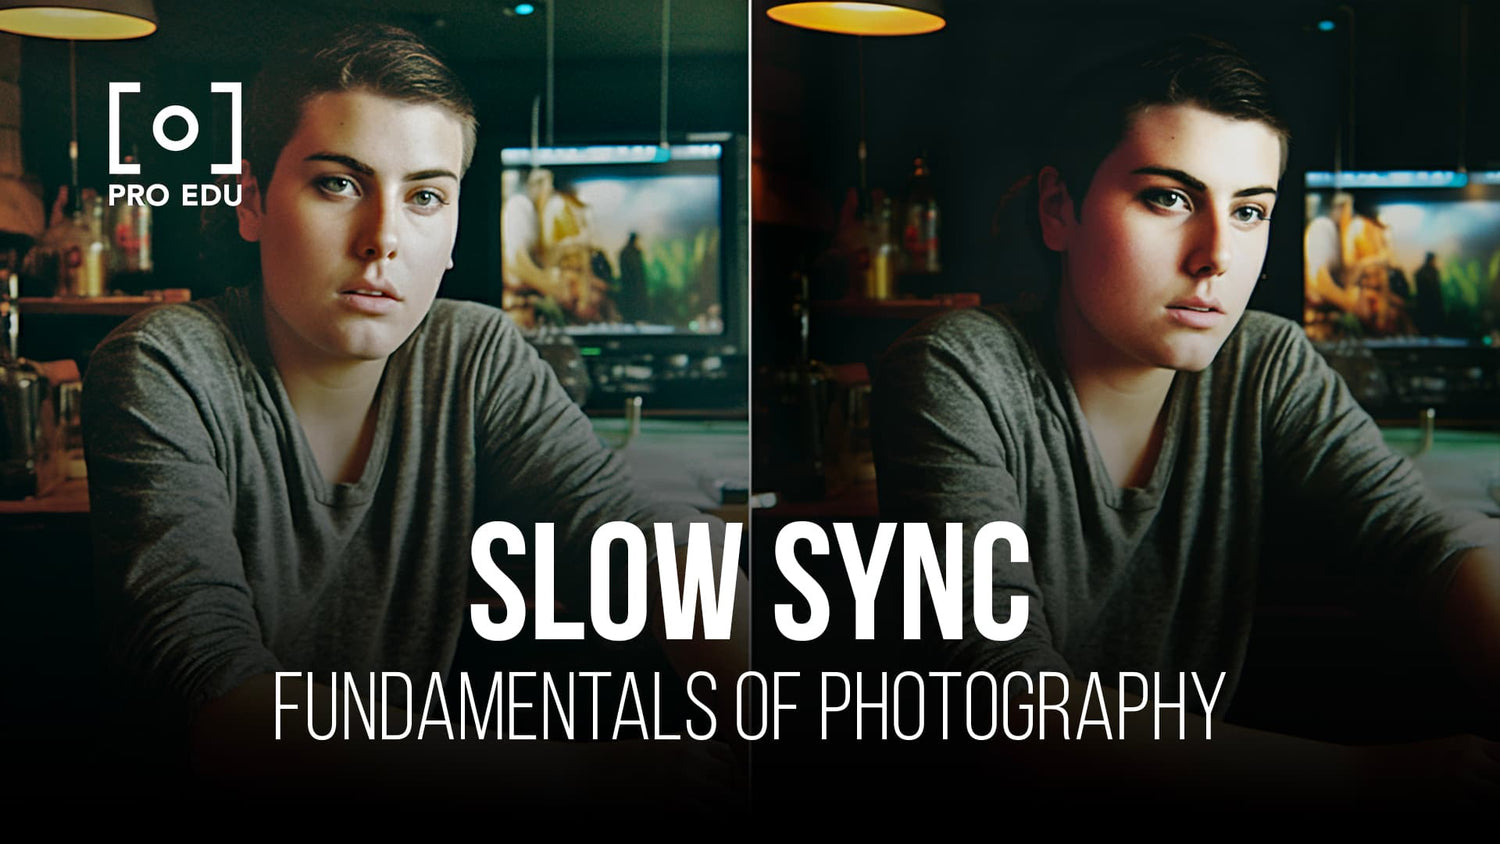 Blending ambient light and flash with slow sync flash techniques in photography